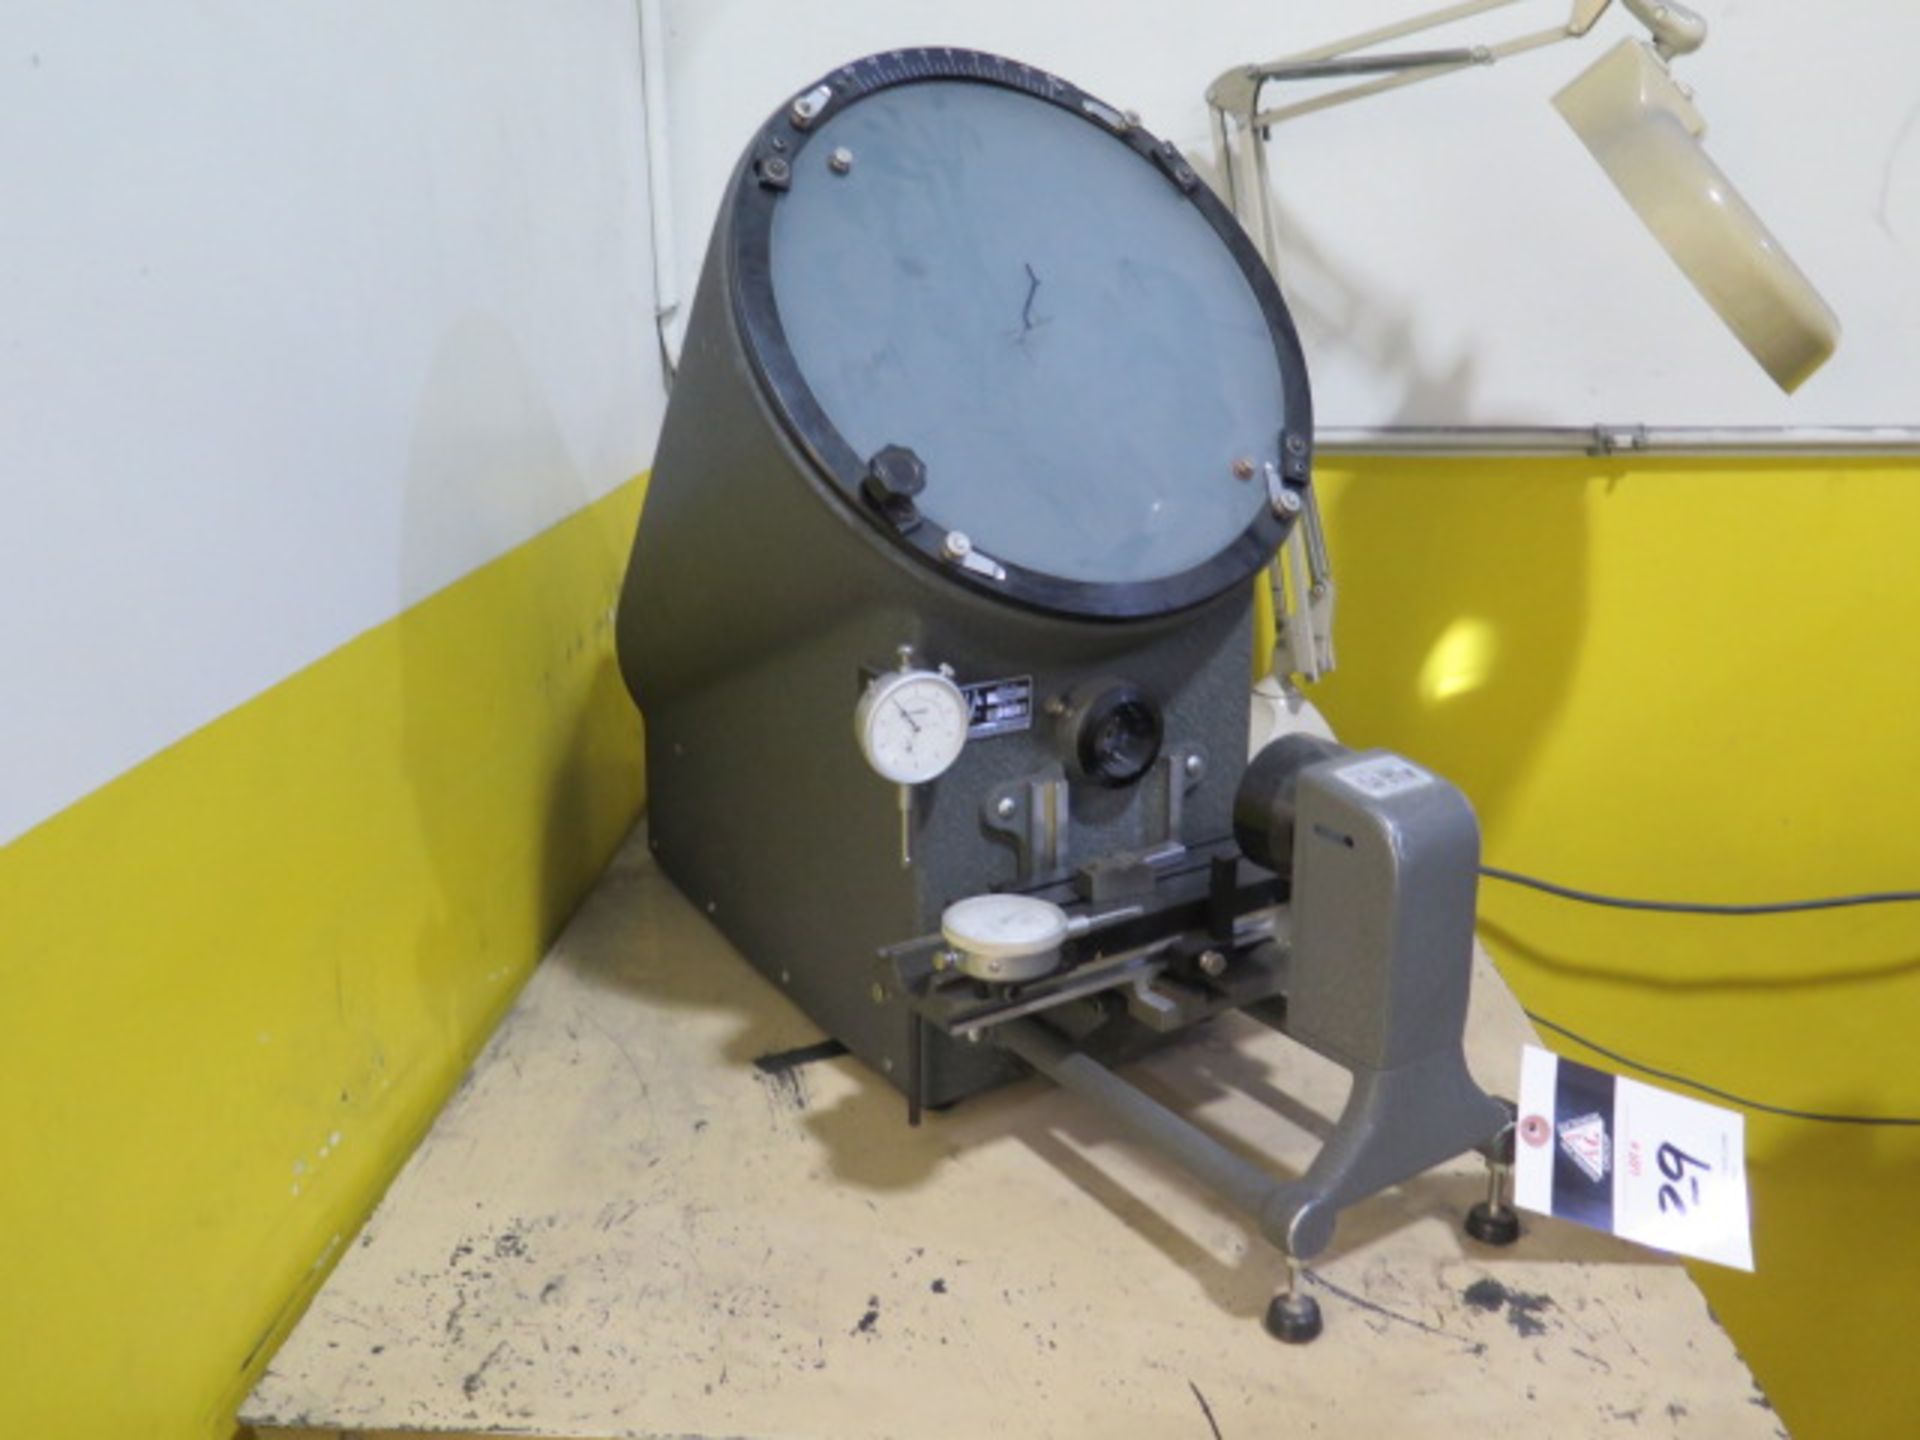 MicroVu 500HP 12” Optical Comparator (SOLD AS-IS - NO WARRANTY) - Image 3 of 8